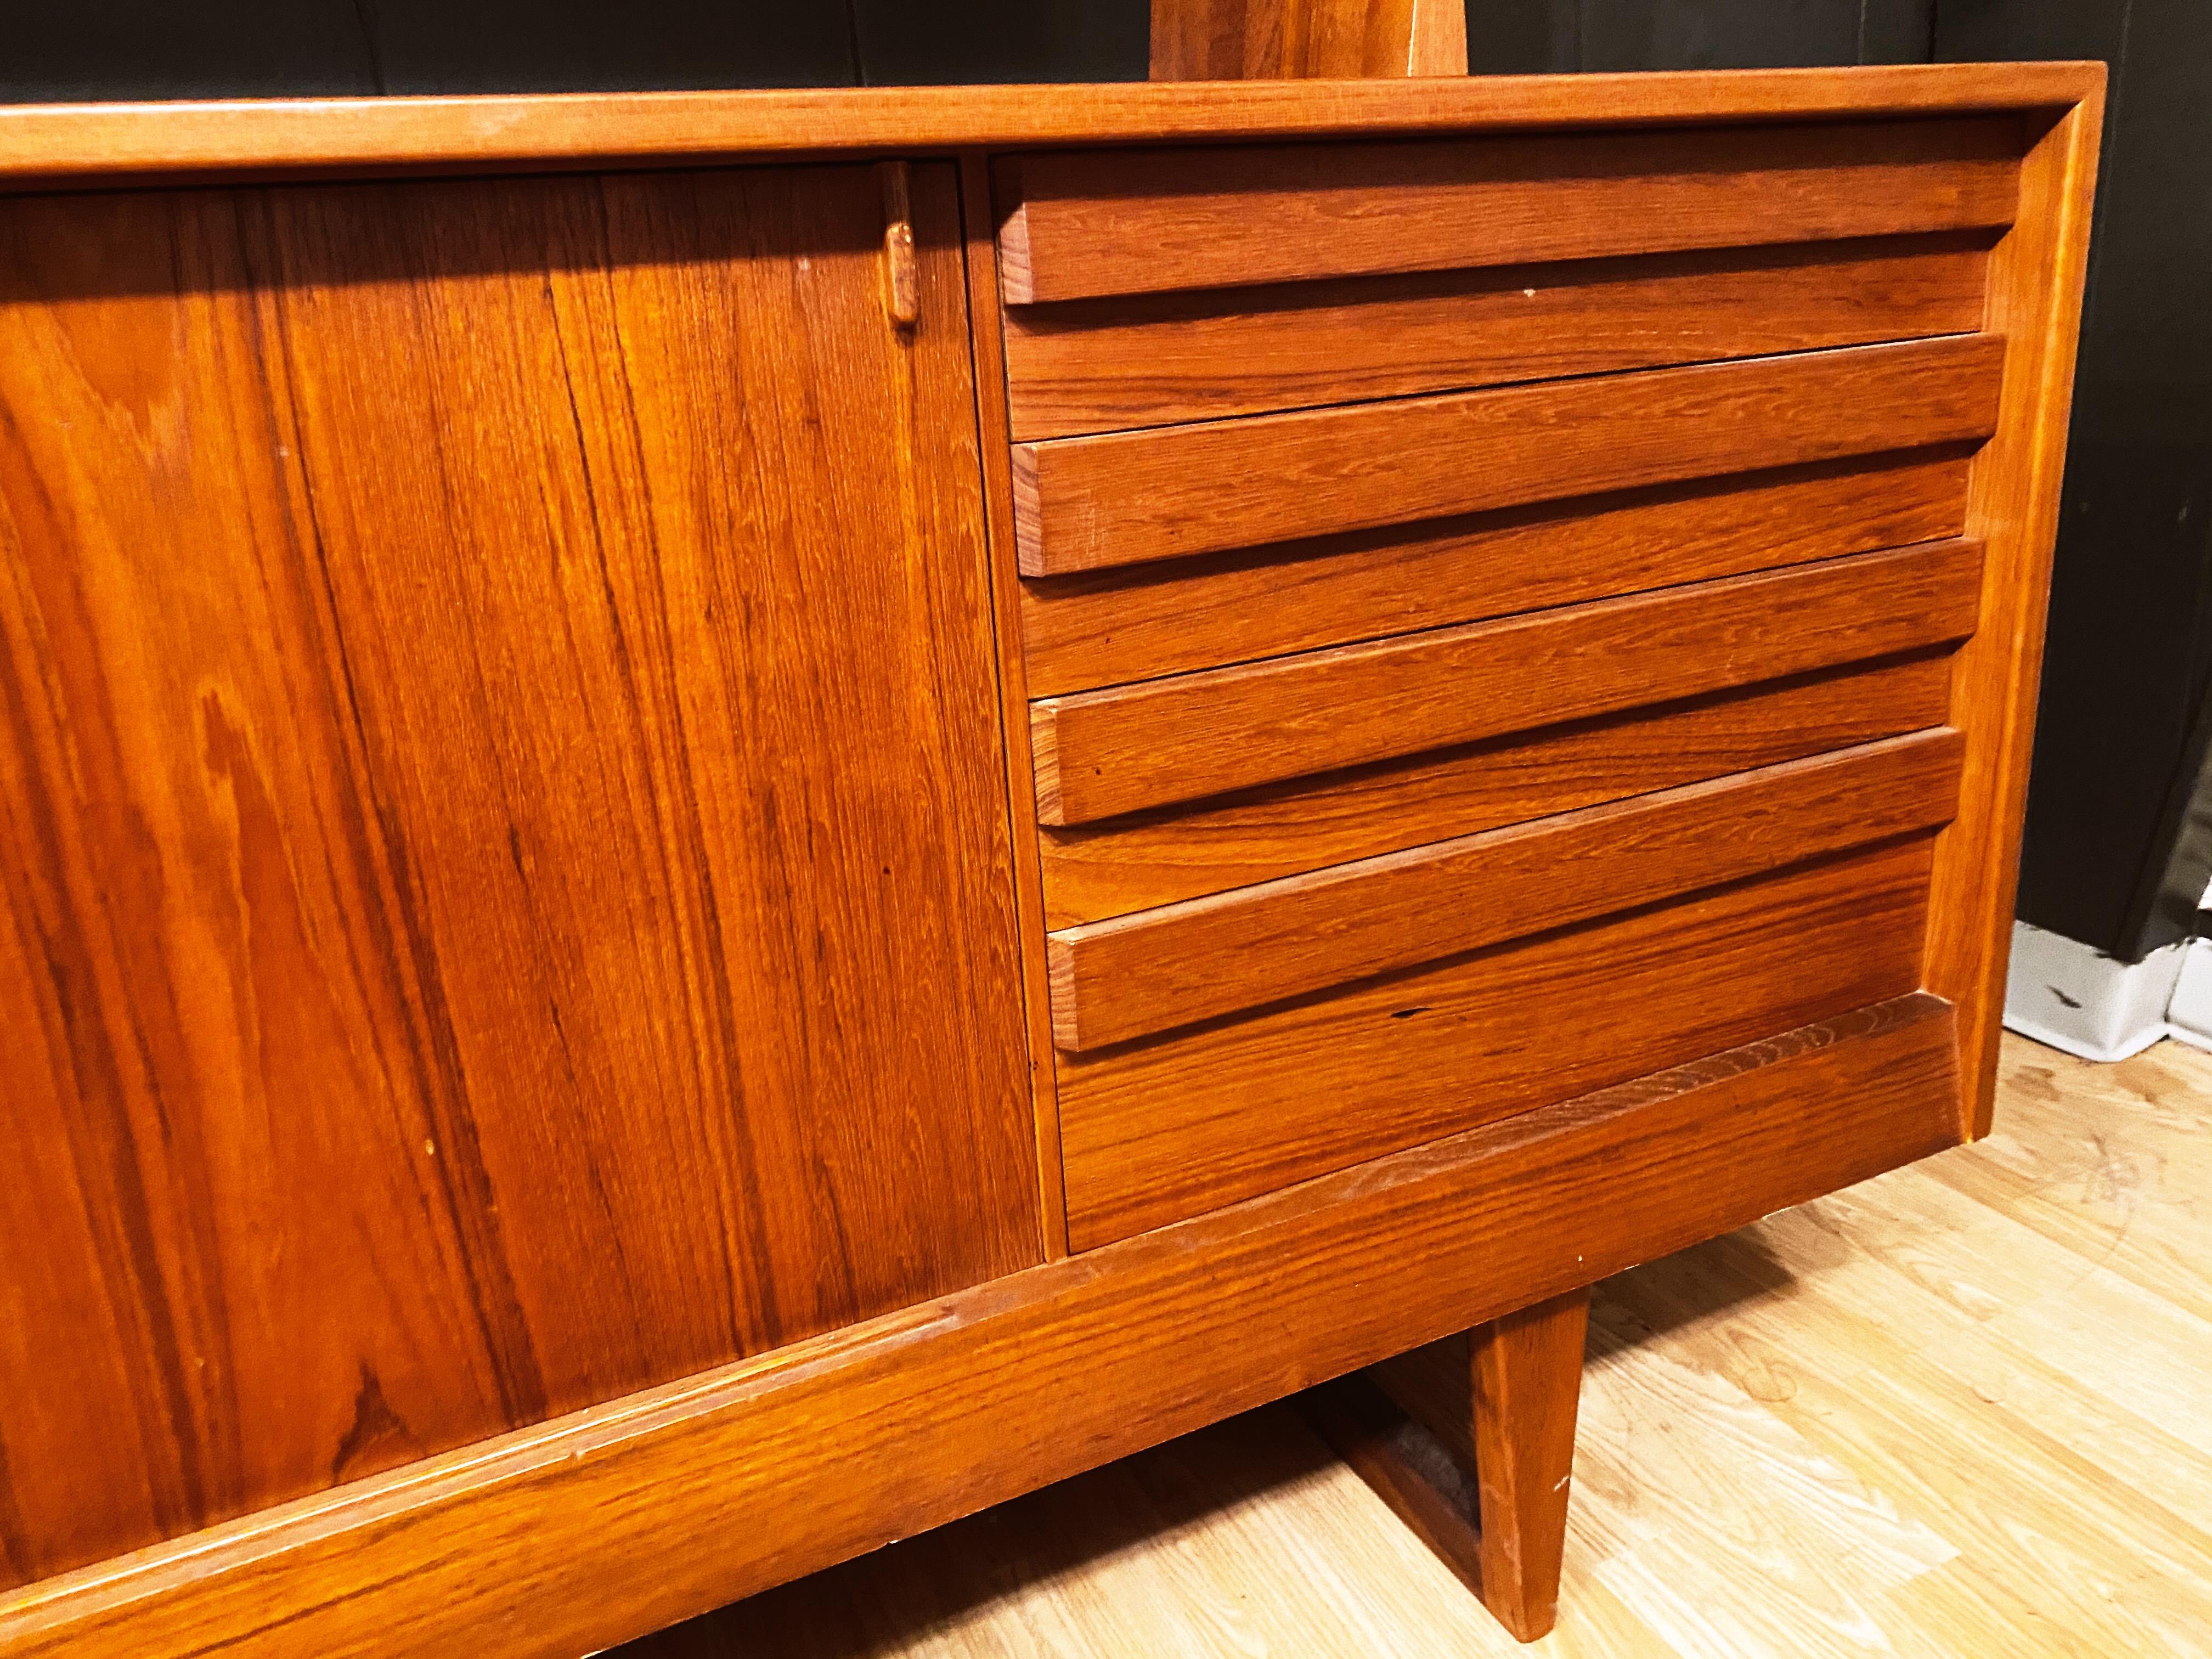 This Danish modern teak credenza and removable hutch top by Kurt Ostervig is in overall good condition, with very minor veneer loss along the bottom front (as seen in photos). Sled base. Sliding doors with interior shelving on top and